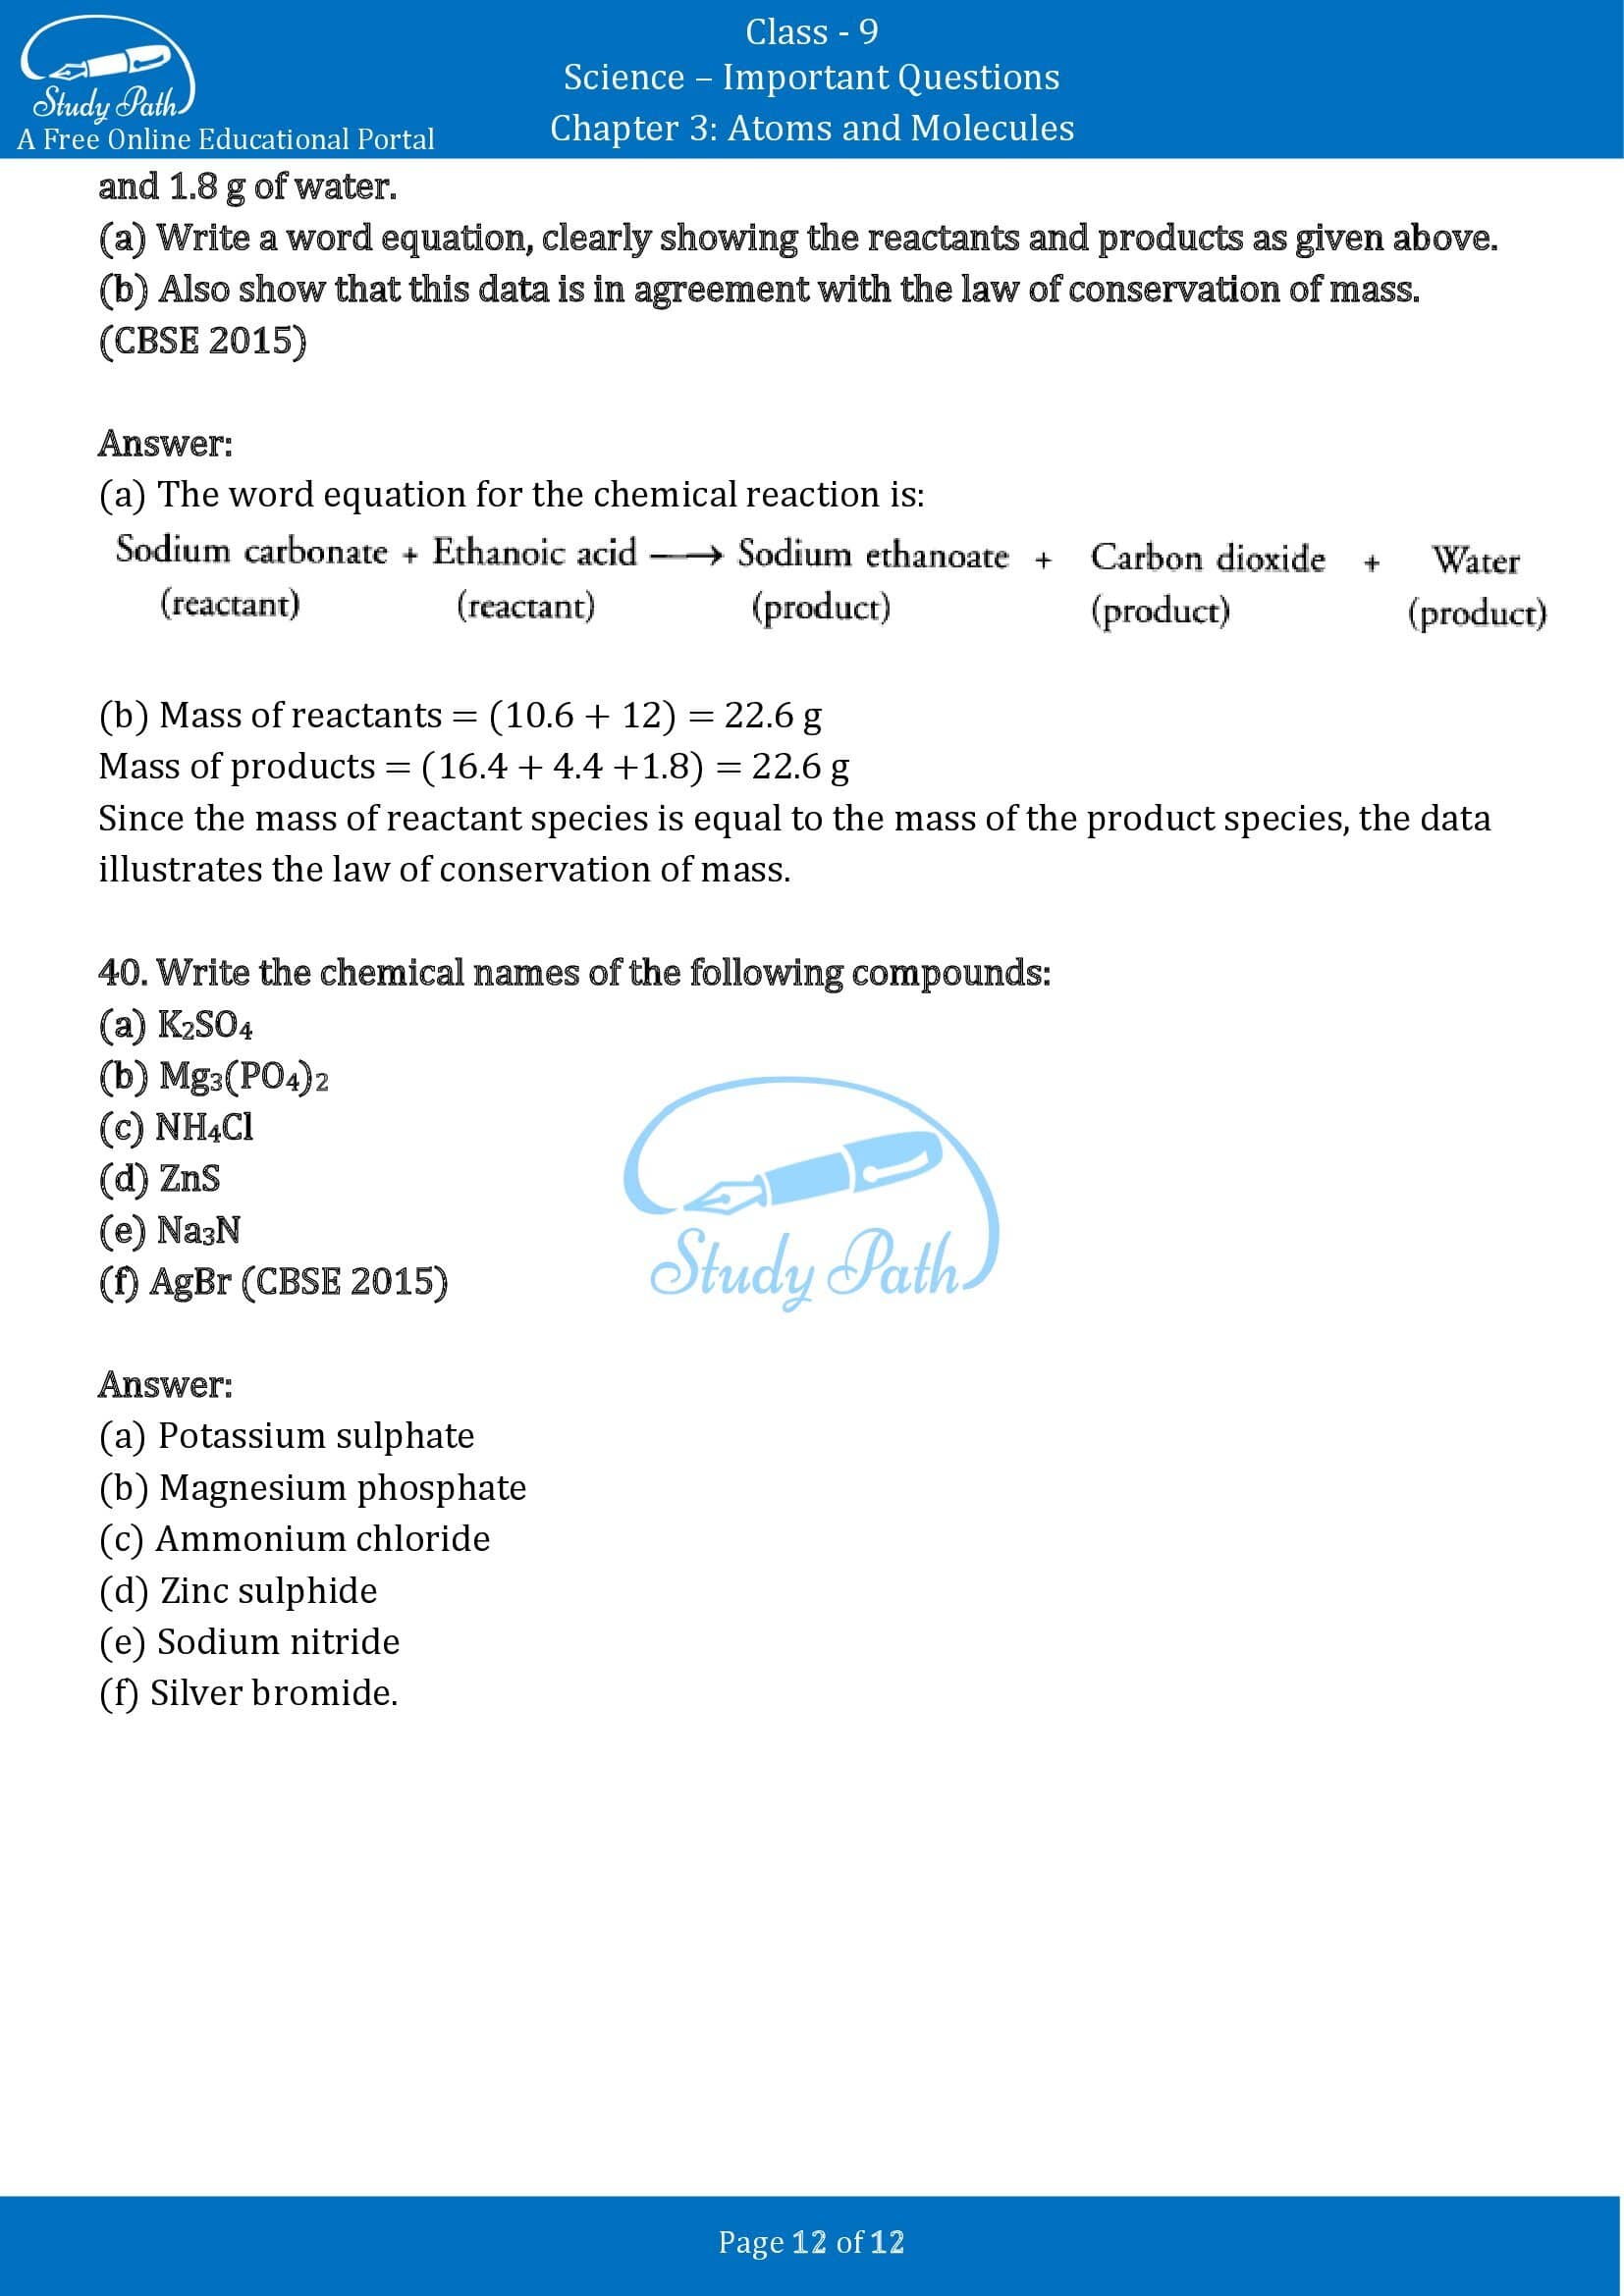 Important Questions for Class 9 Science Chapter 3 Atoms and Molecules 00012